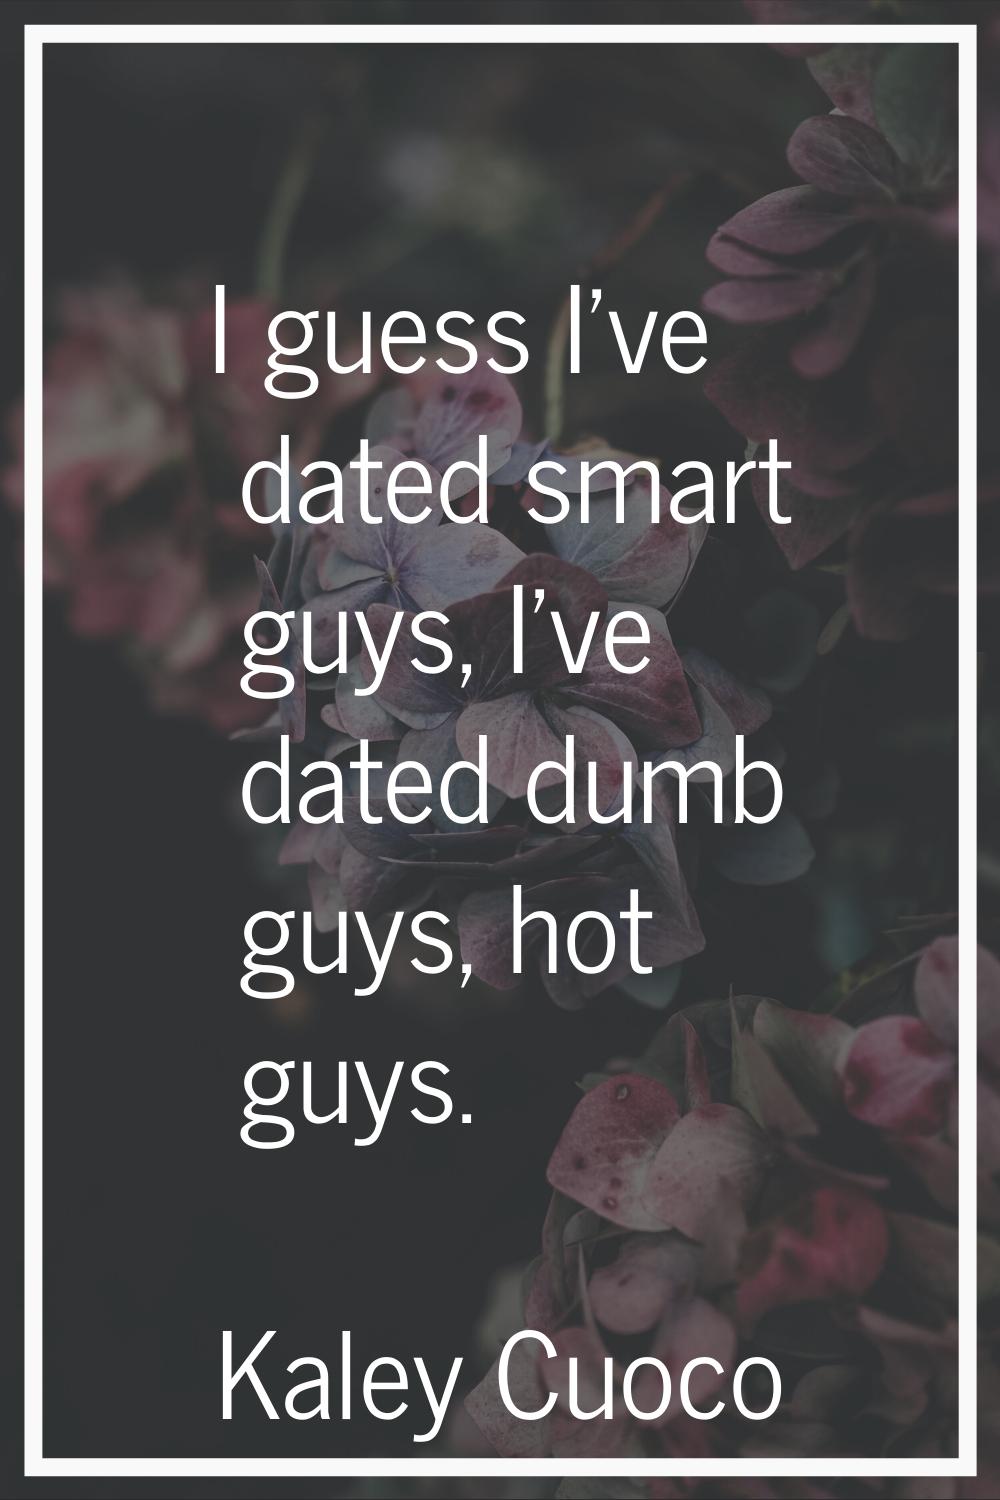 I guess I've dated smart guys, I've dated dumb guys, hot guys.